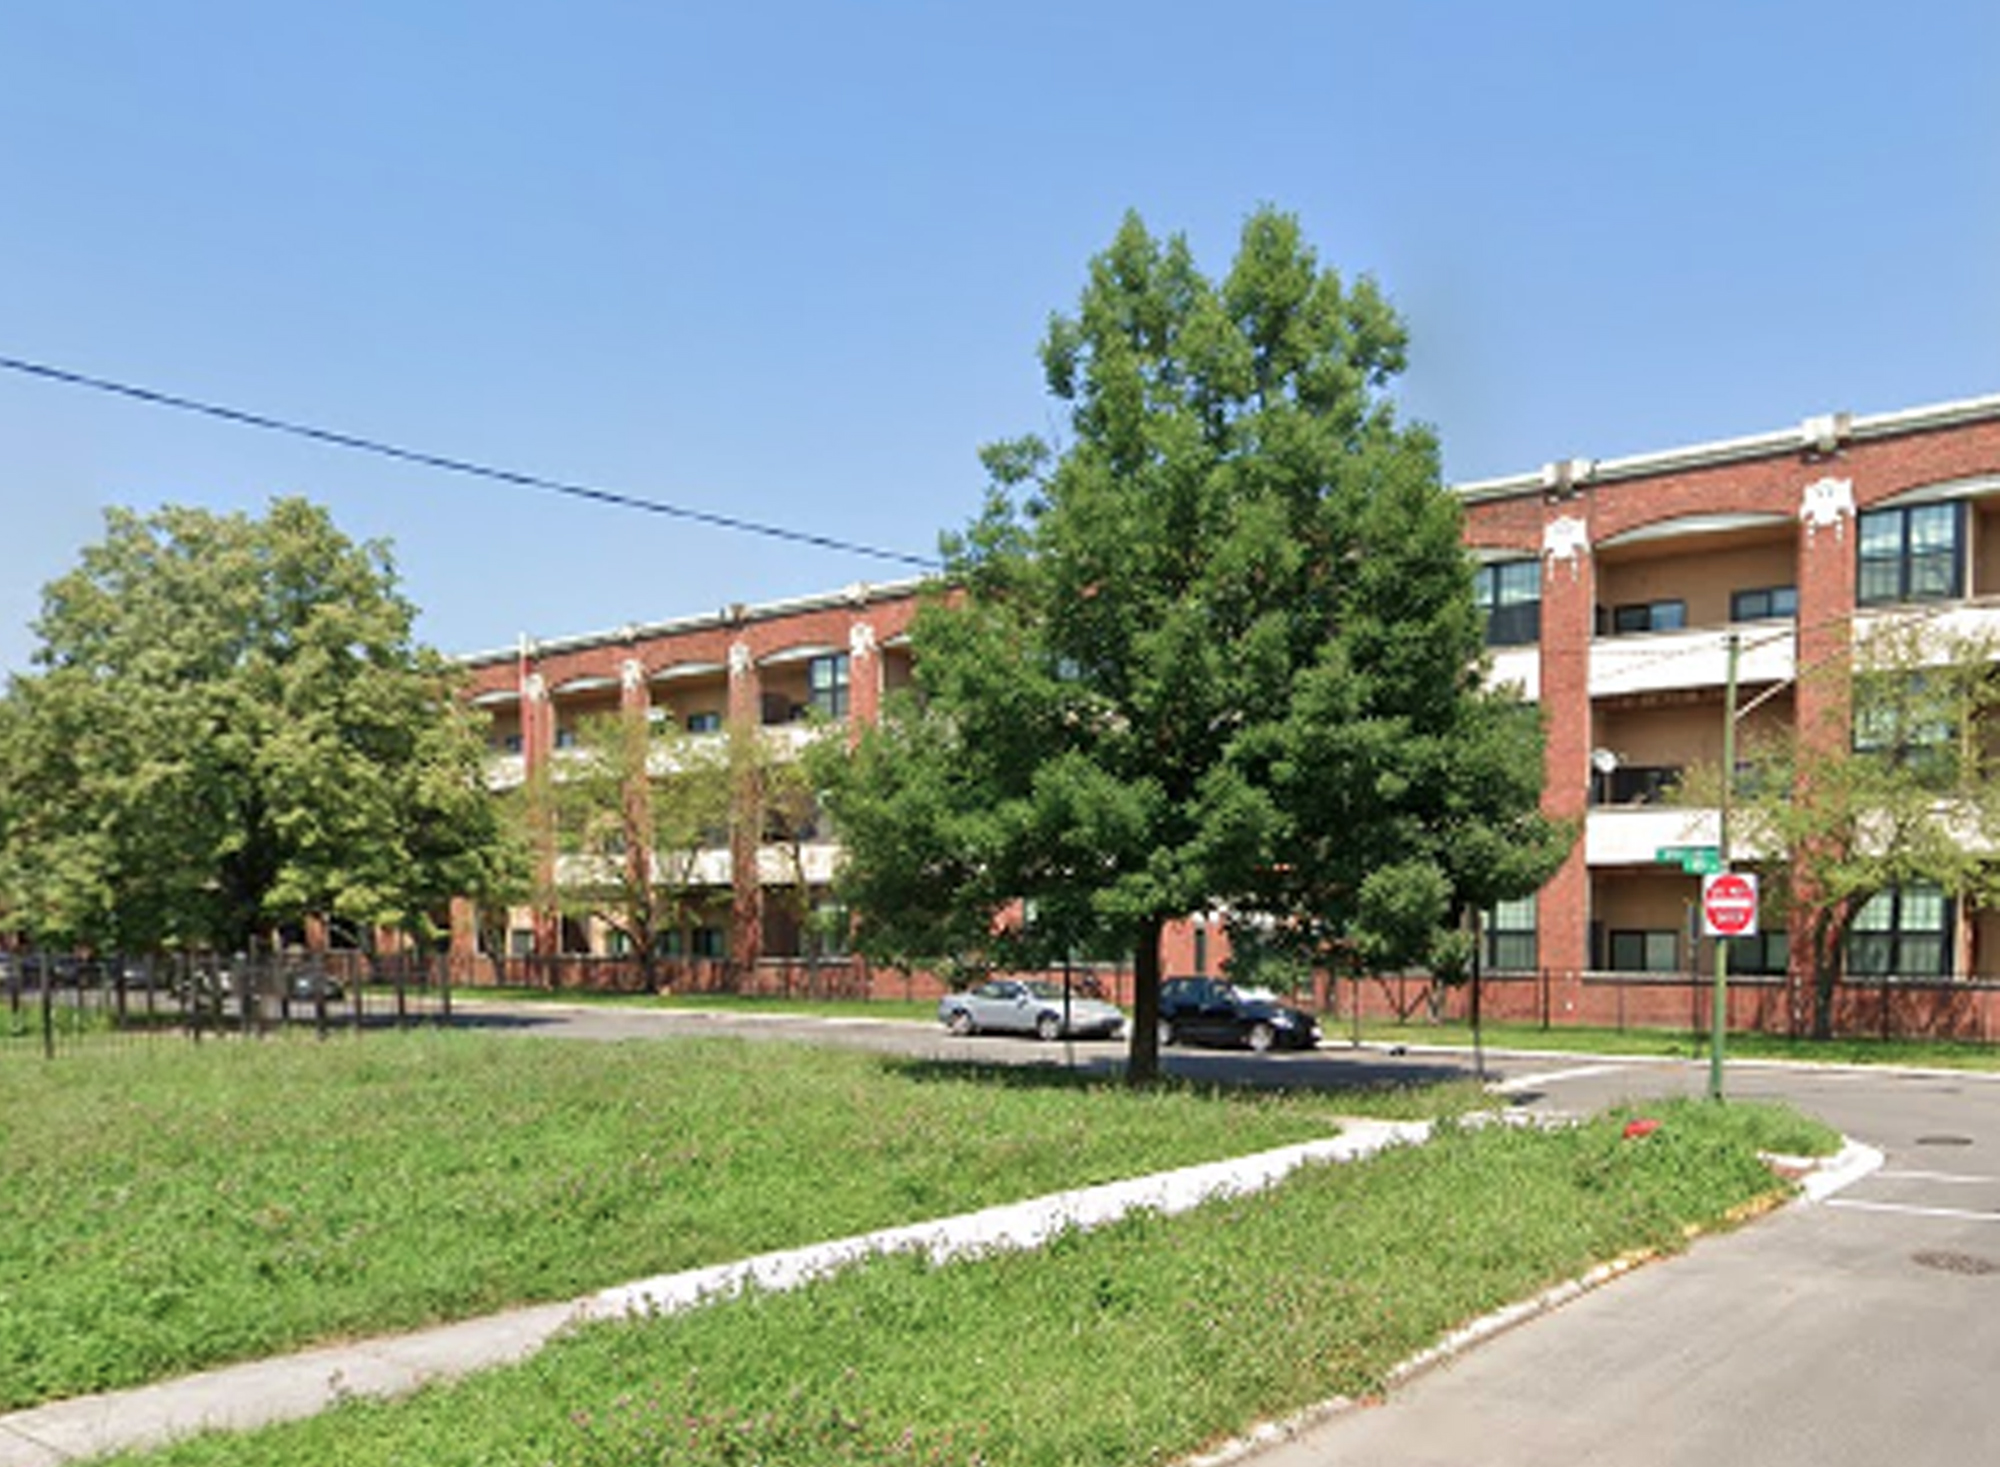 Pullman Wheelworks, 901 E. 104th St. Mercy Housing turned the former manufacturing facility into a 210-unit affordable housing complex in 1980. 